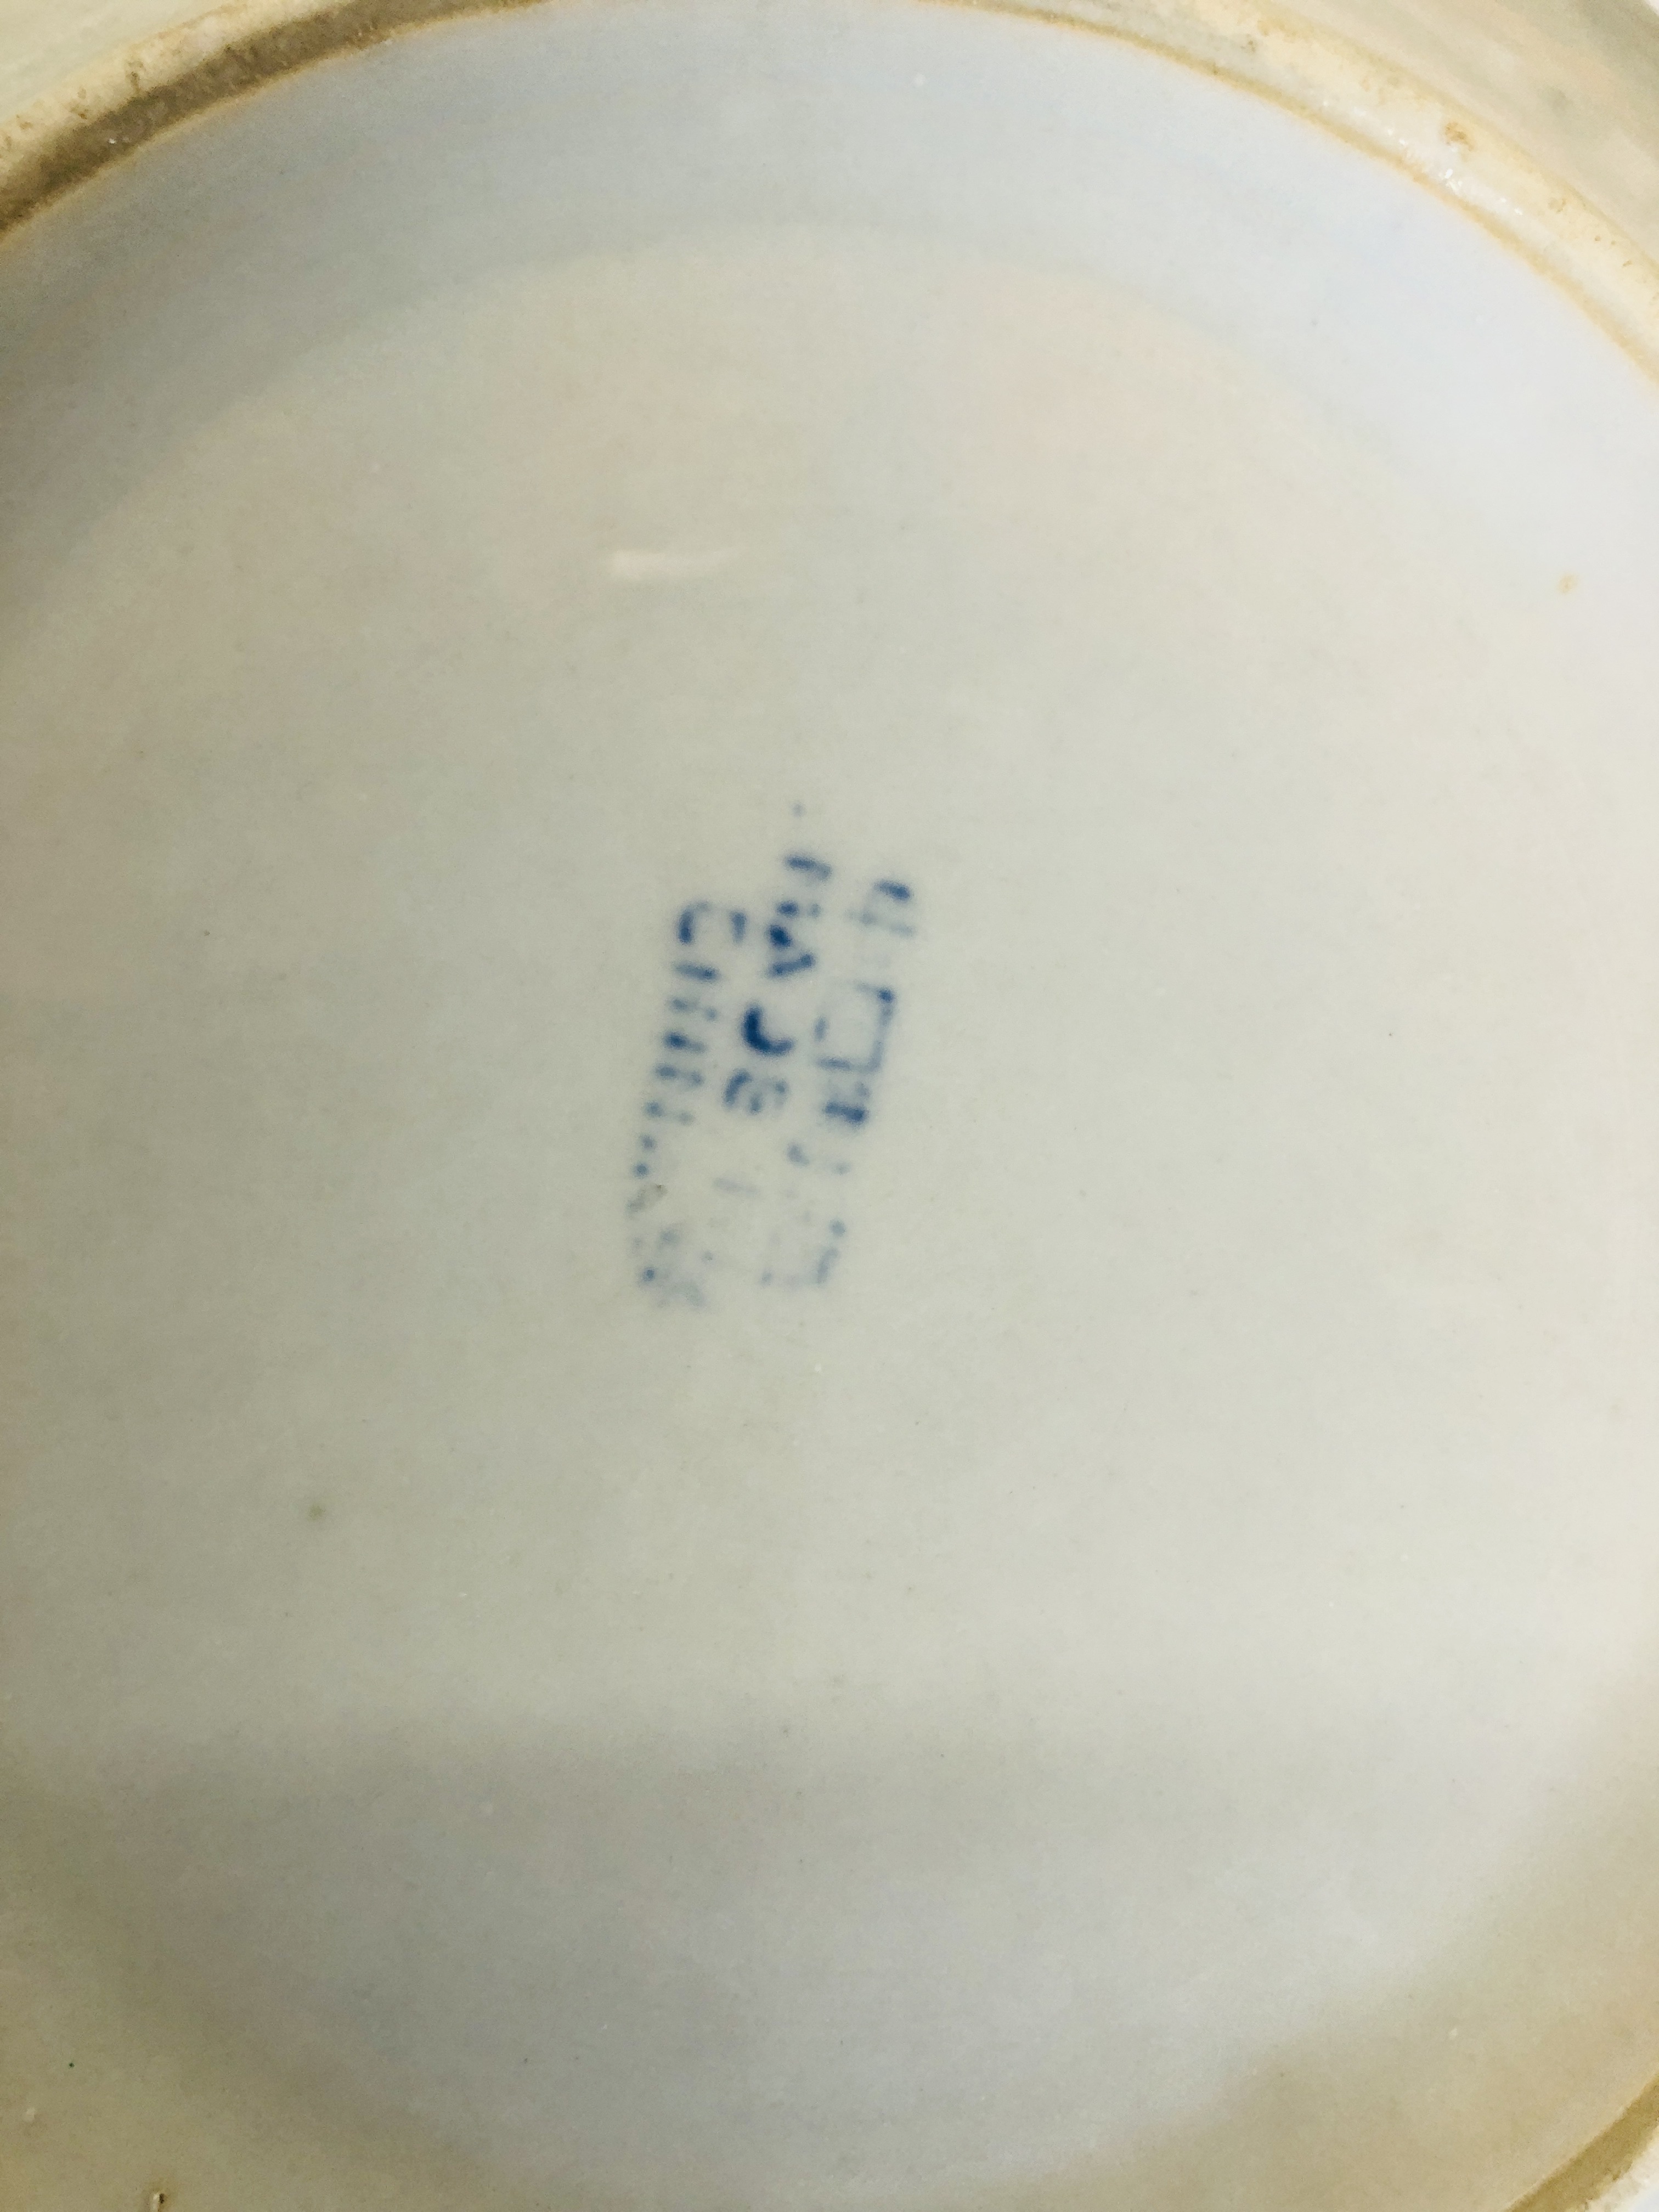 A GROUP OF CHINESE BLUE AND WHITE PLATES AND DISHES DECORATED WITH A FISH SYMBOL ALONG WITH A - Image 13 of 14